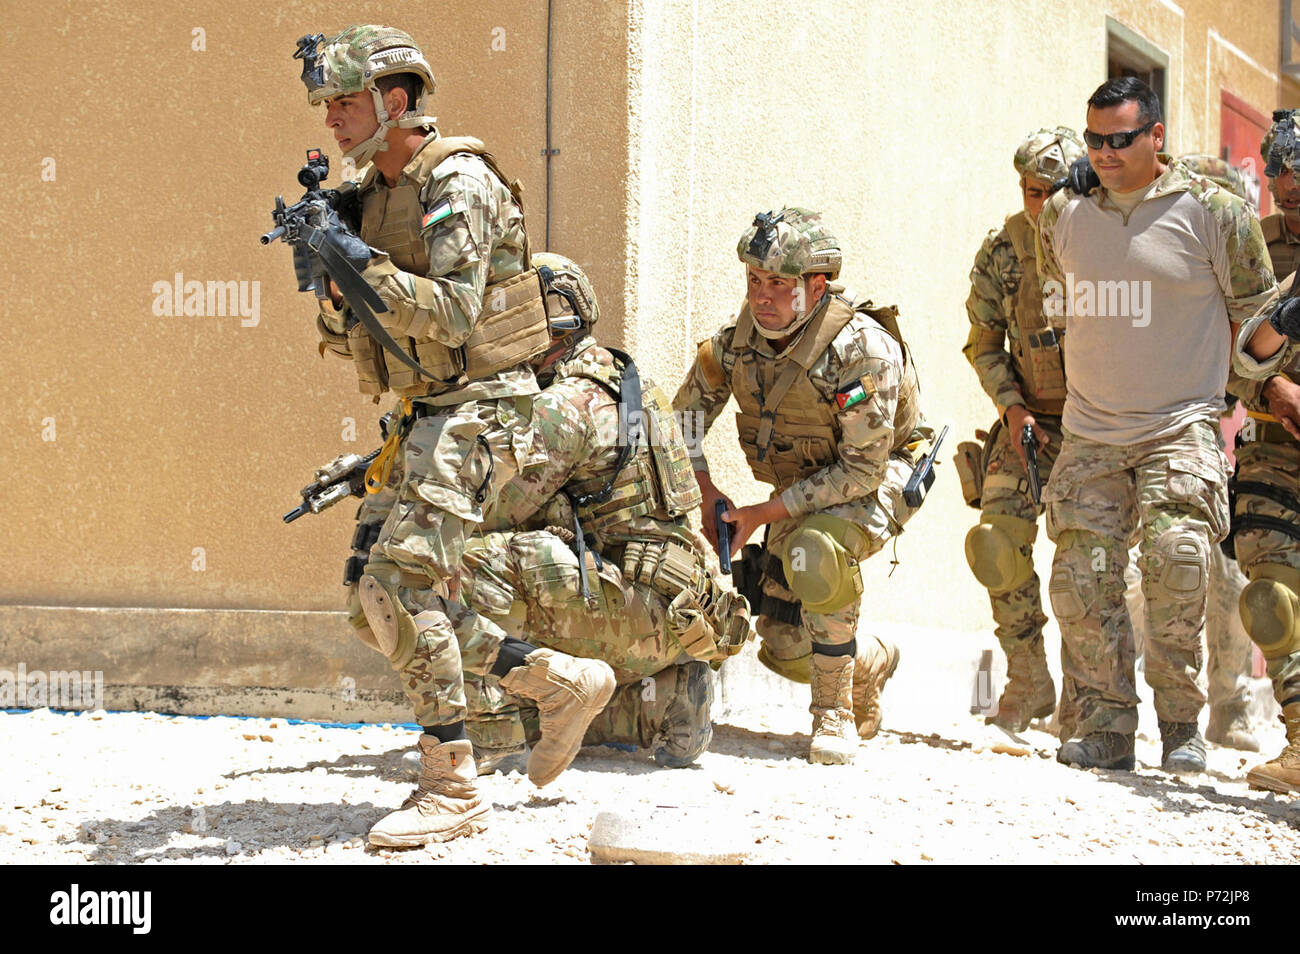 Jordan (May 11, 2017) Members of the Jordanian Armed Forces Special Task Force, and U.S. Air Force Special Operations, escort a prisoner, during an interoperability combat search and rescue training at the King Abdullah II Special Operations Training Center, as part of Exercise Eager Lion. Eager Lion is an annual U.S. Central Command exercise in Jordan designed to strengthen military-to-military relationships between the U.S., Jordan and other international partners. This year's iteration is comprised of about 7,200 military personnel from more than 20 nations that will respond to scenarios in Stock Photo